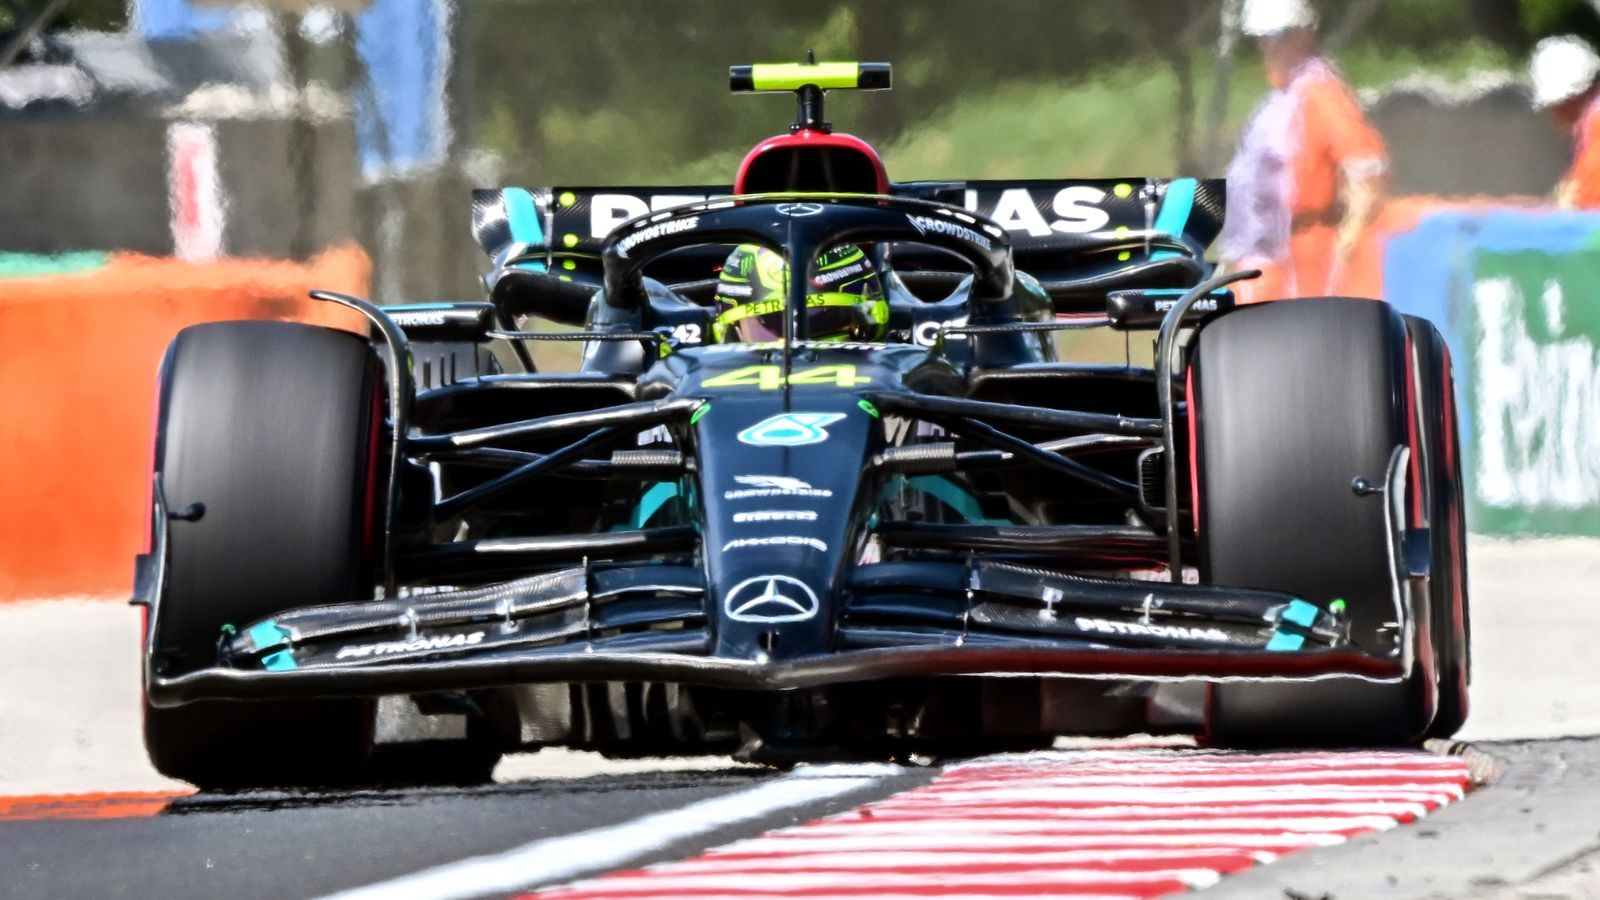 Hungarian GP Practice Three Lewis Hamilton tops timesheet ahead of both Red Bulls to move into pole position contention F1 News